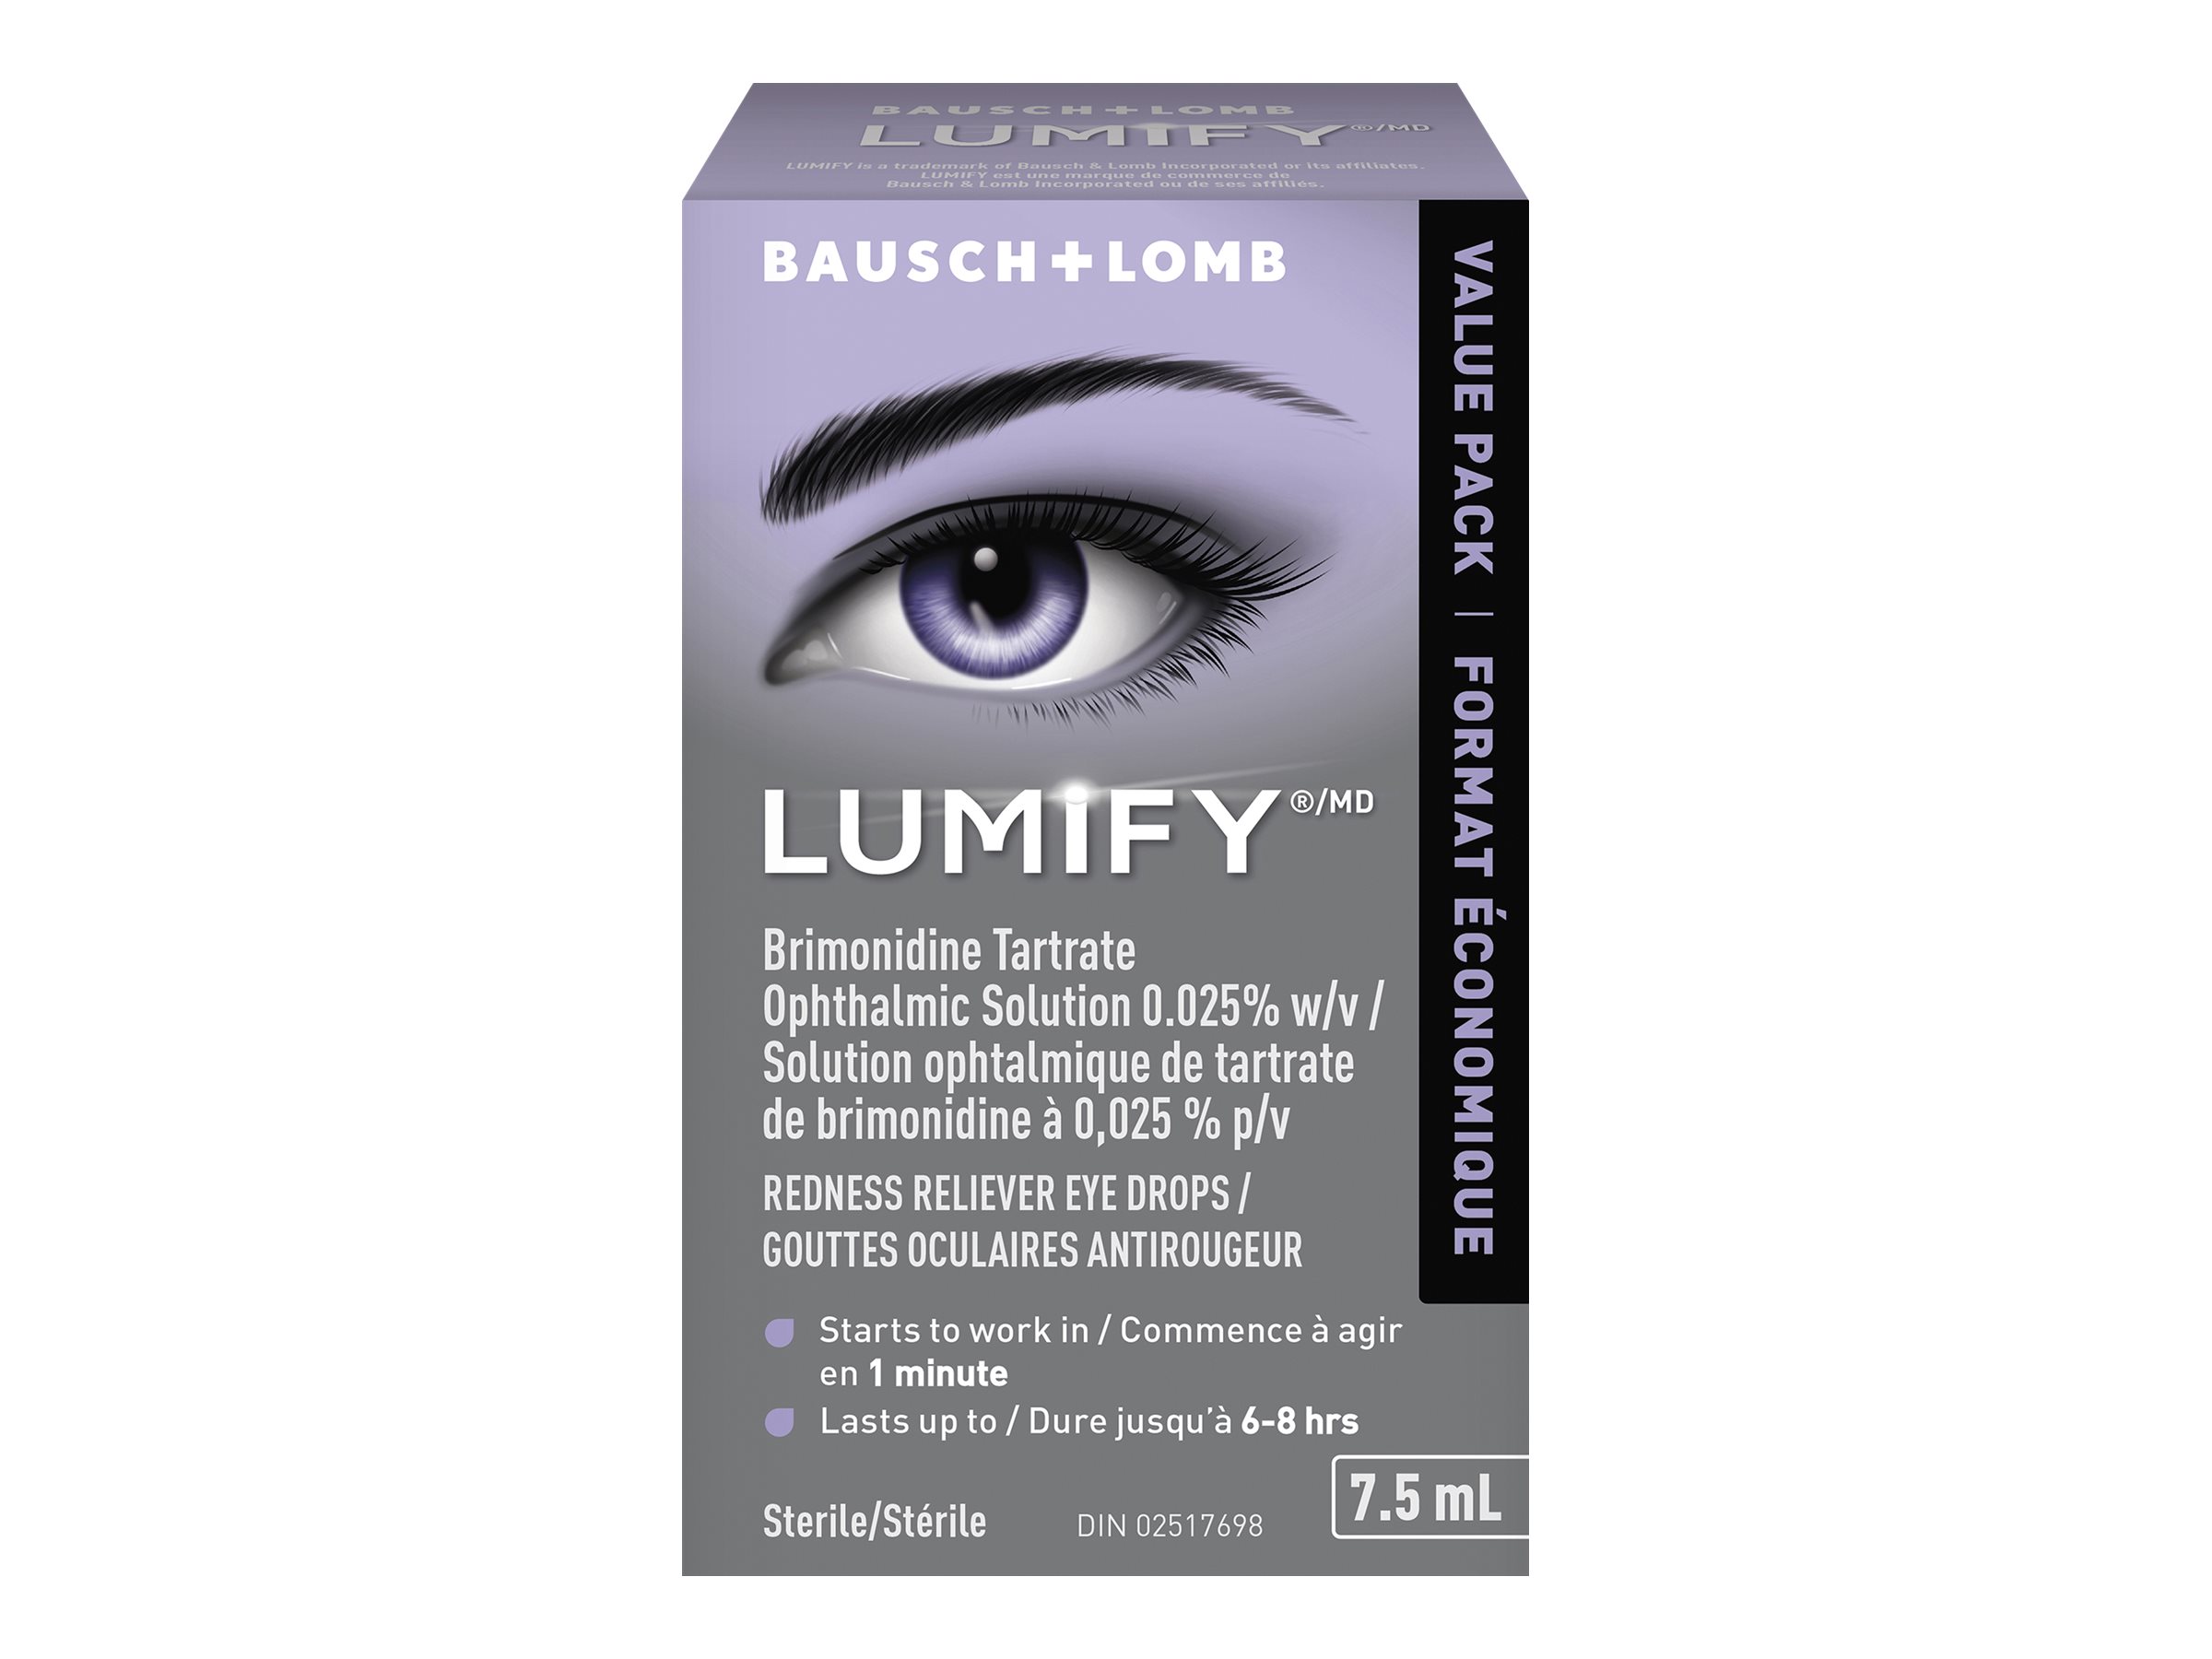 Bausch + Lomb Lumify Redness Reliever Eye Drops - 7.5ml